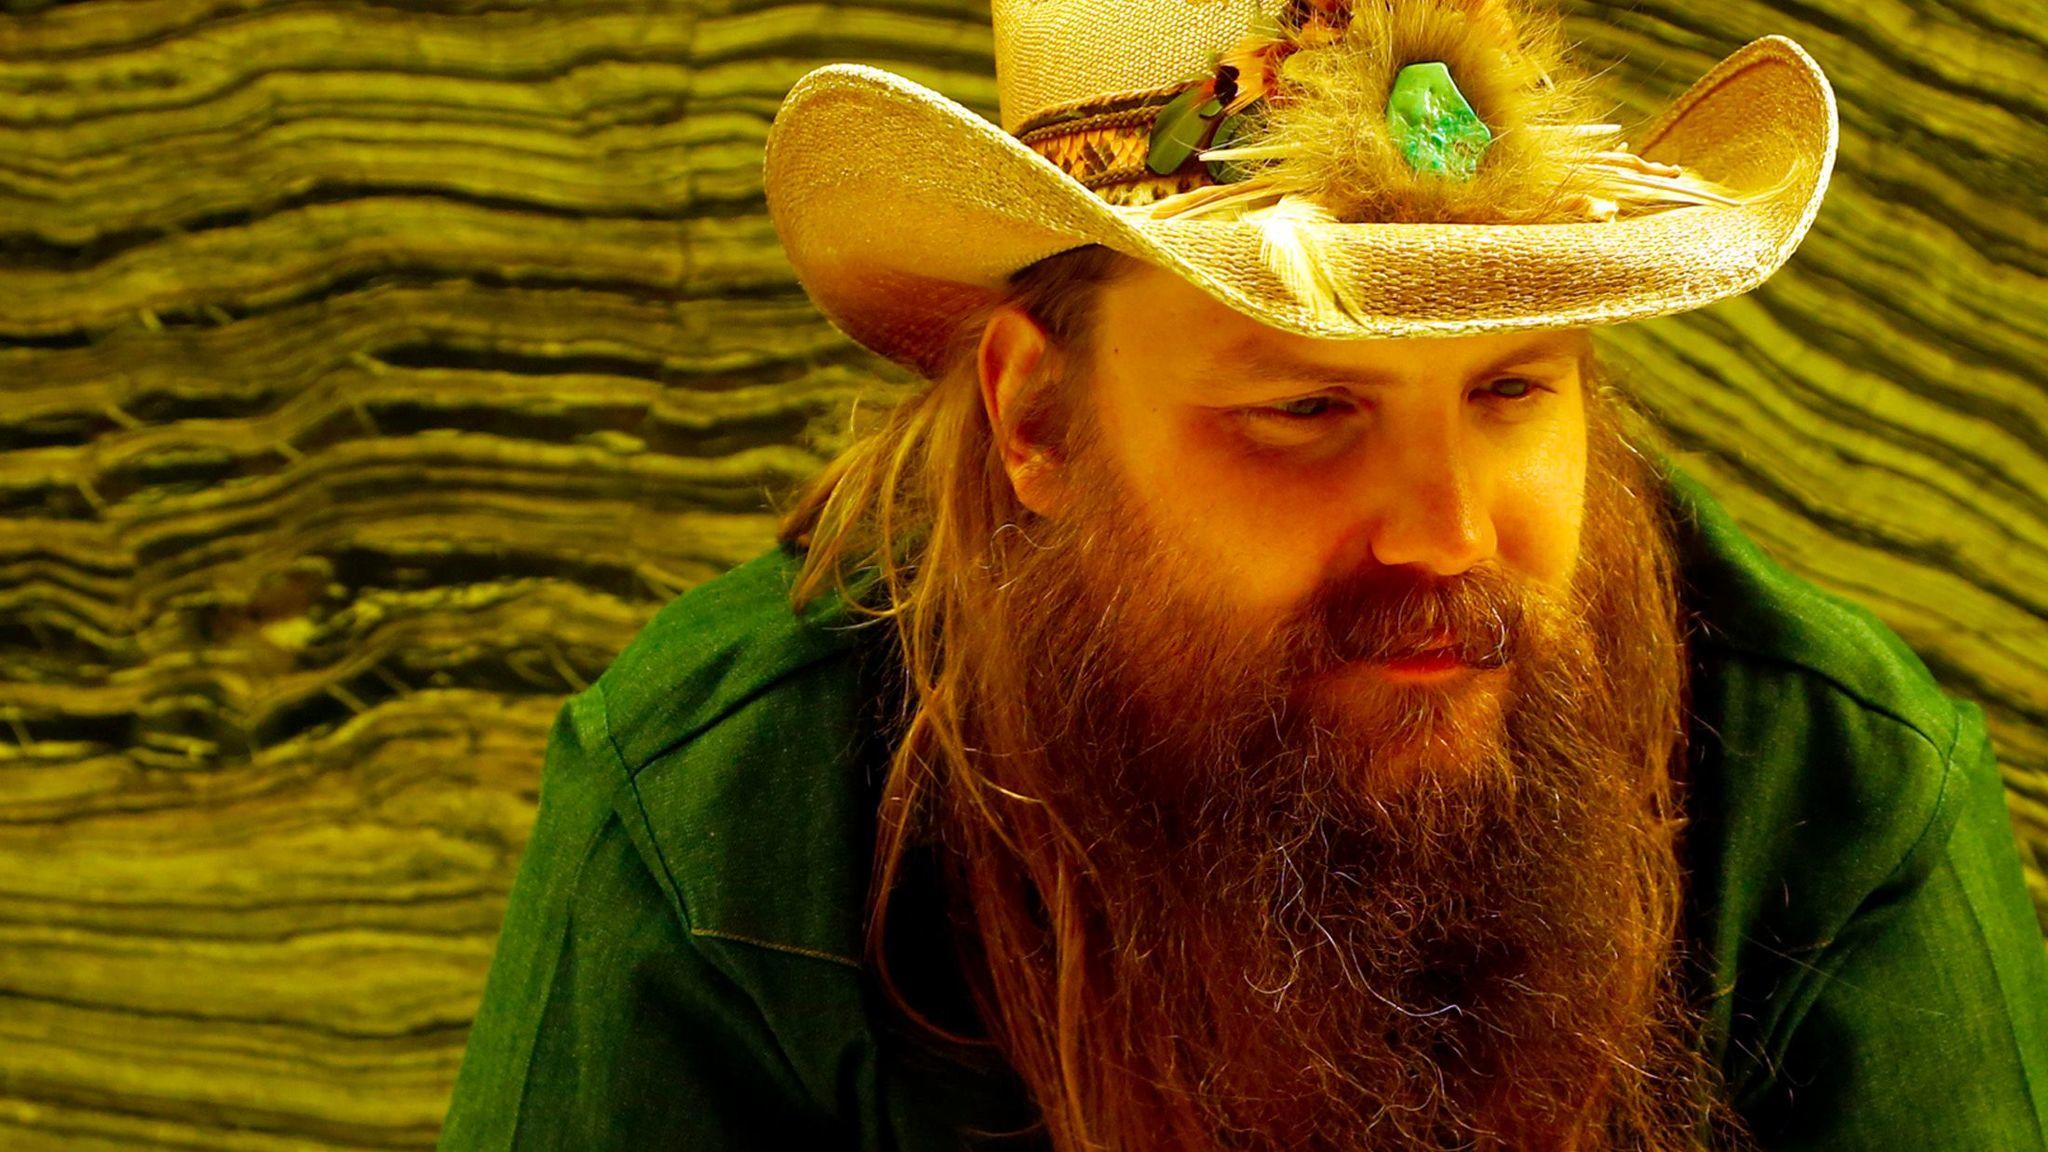 Chris Stapleton will be honored as a CMT Artist of the Year on Oct. 18 in a ceremony that also will highlight Hurricane Harvey relief efforts. (Genaro Molina / Los Angeles Times)